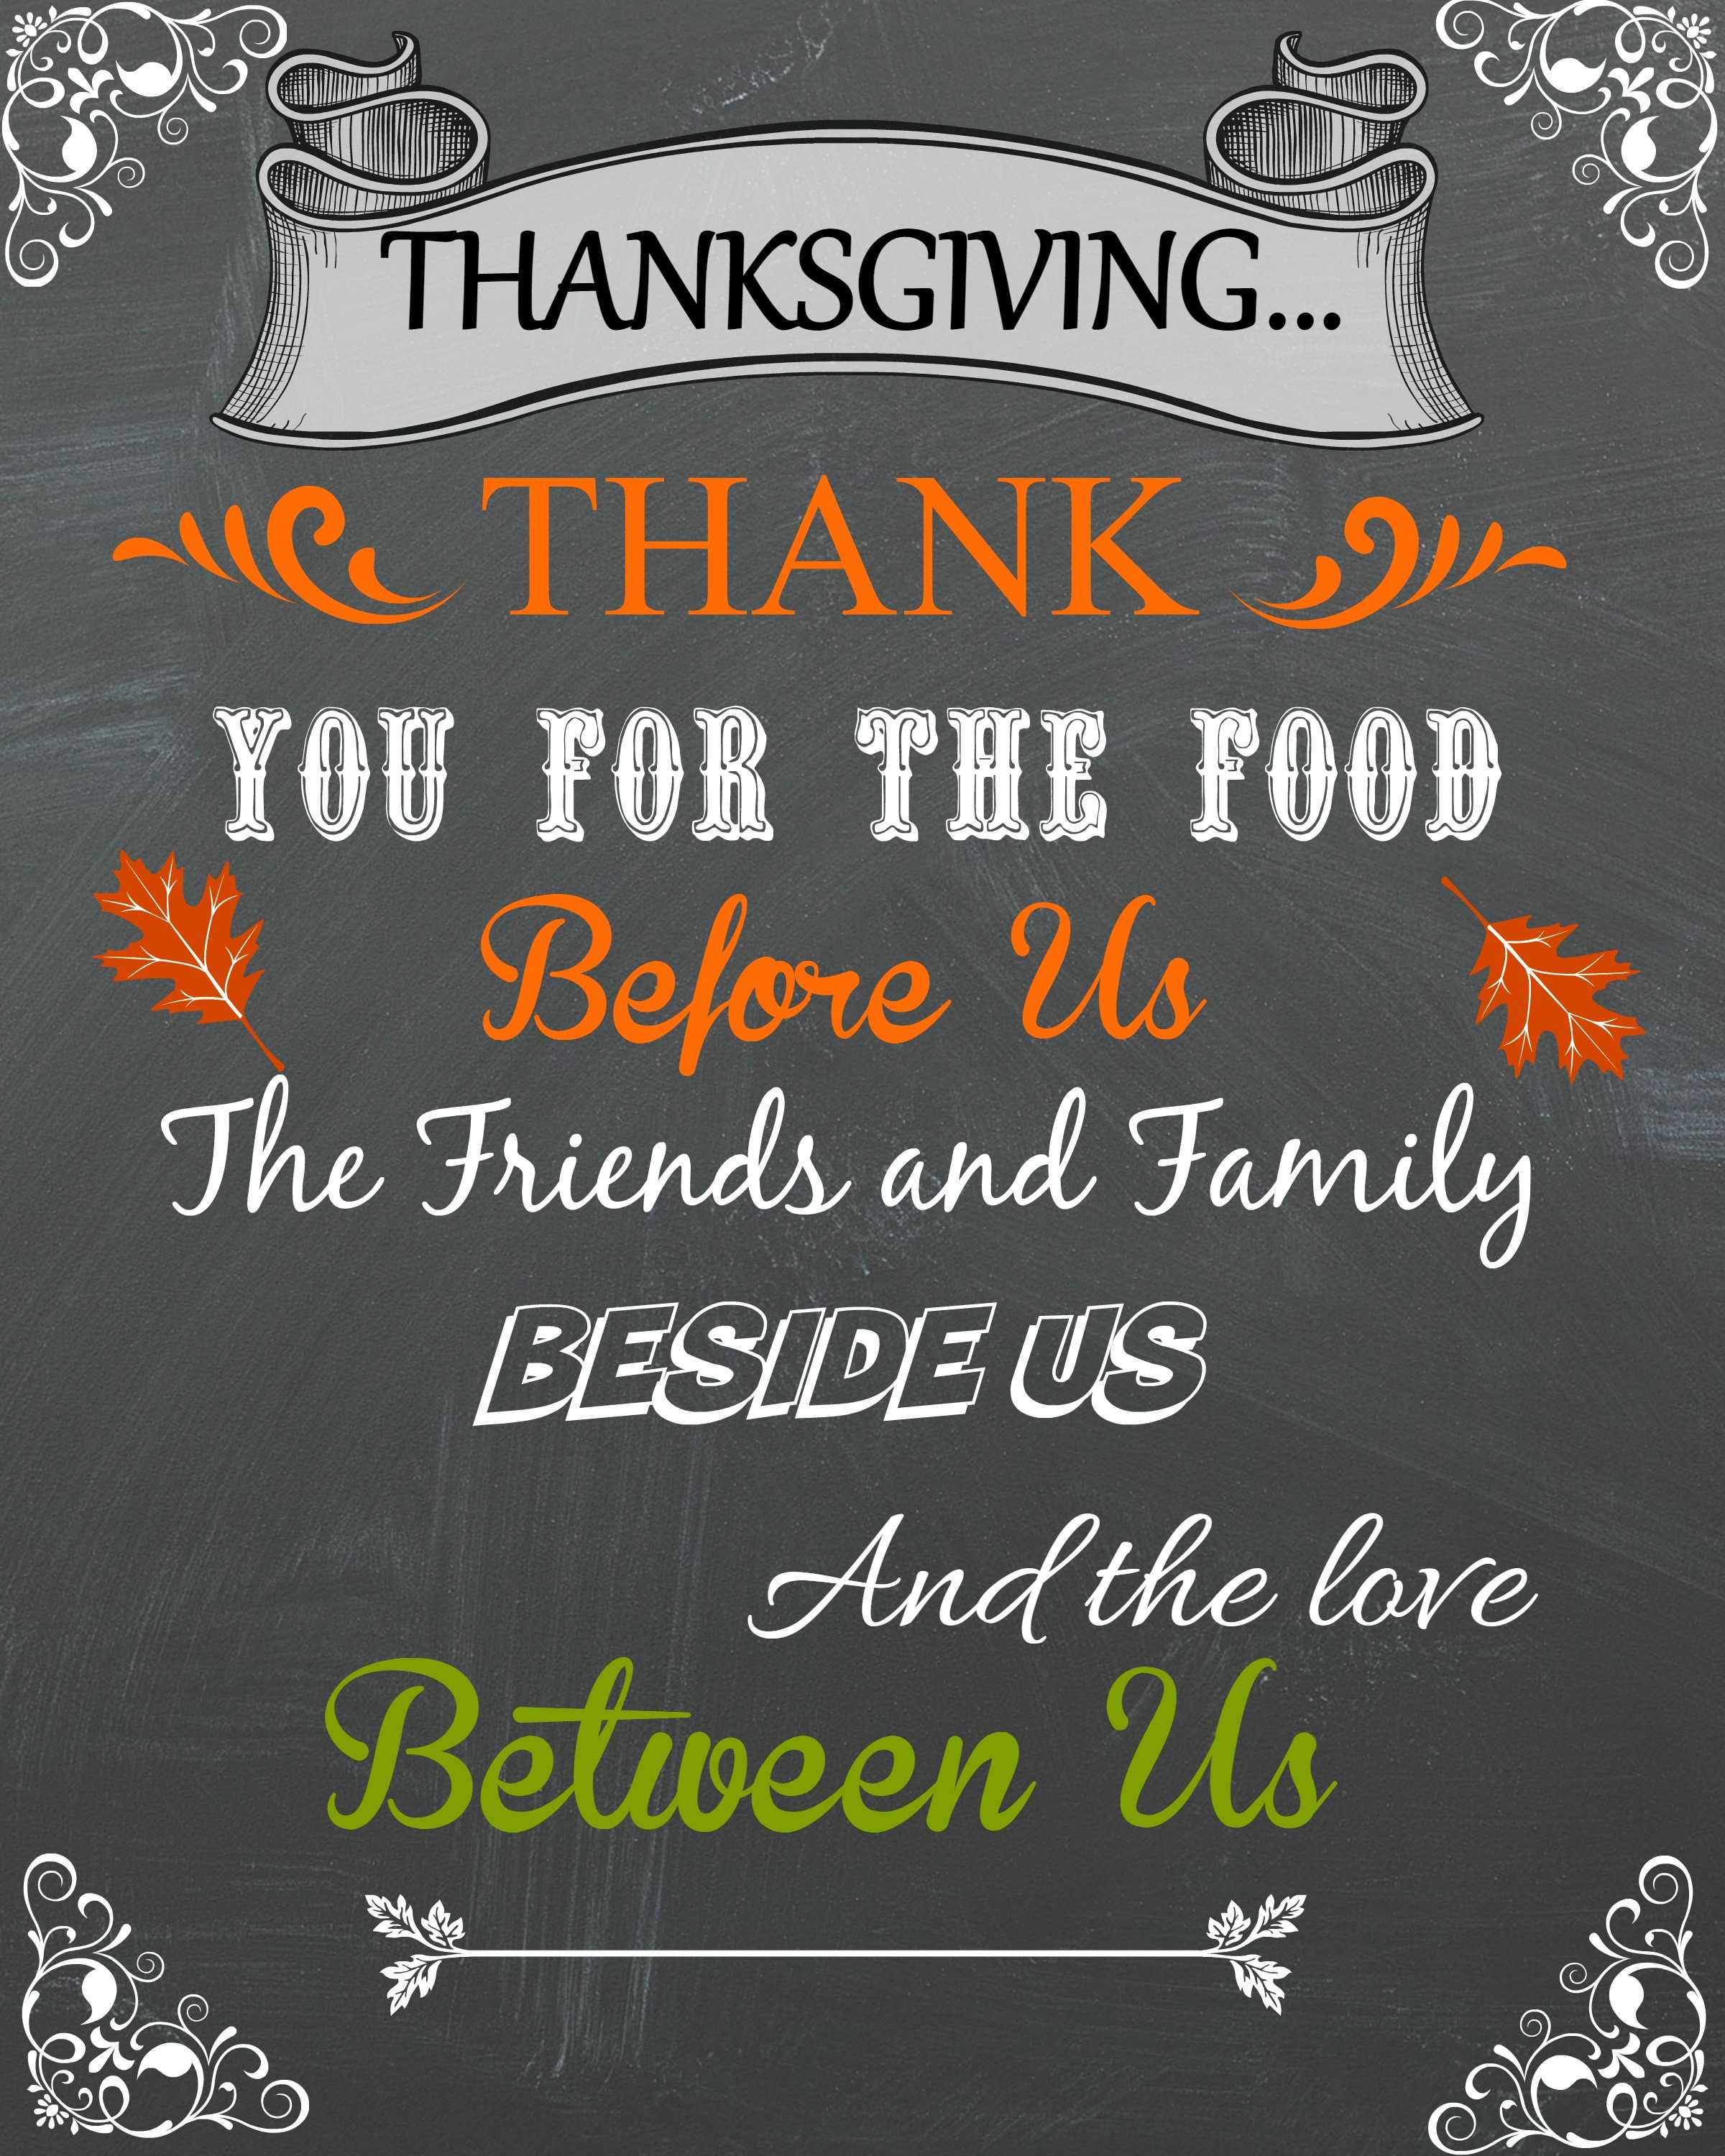 Thanksgiving Blessing Quotes
 Blessings Debbiedoos